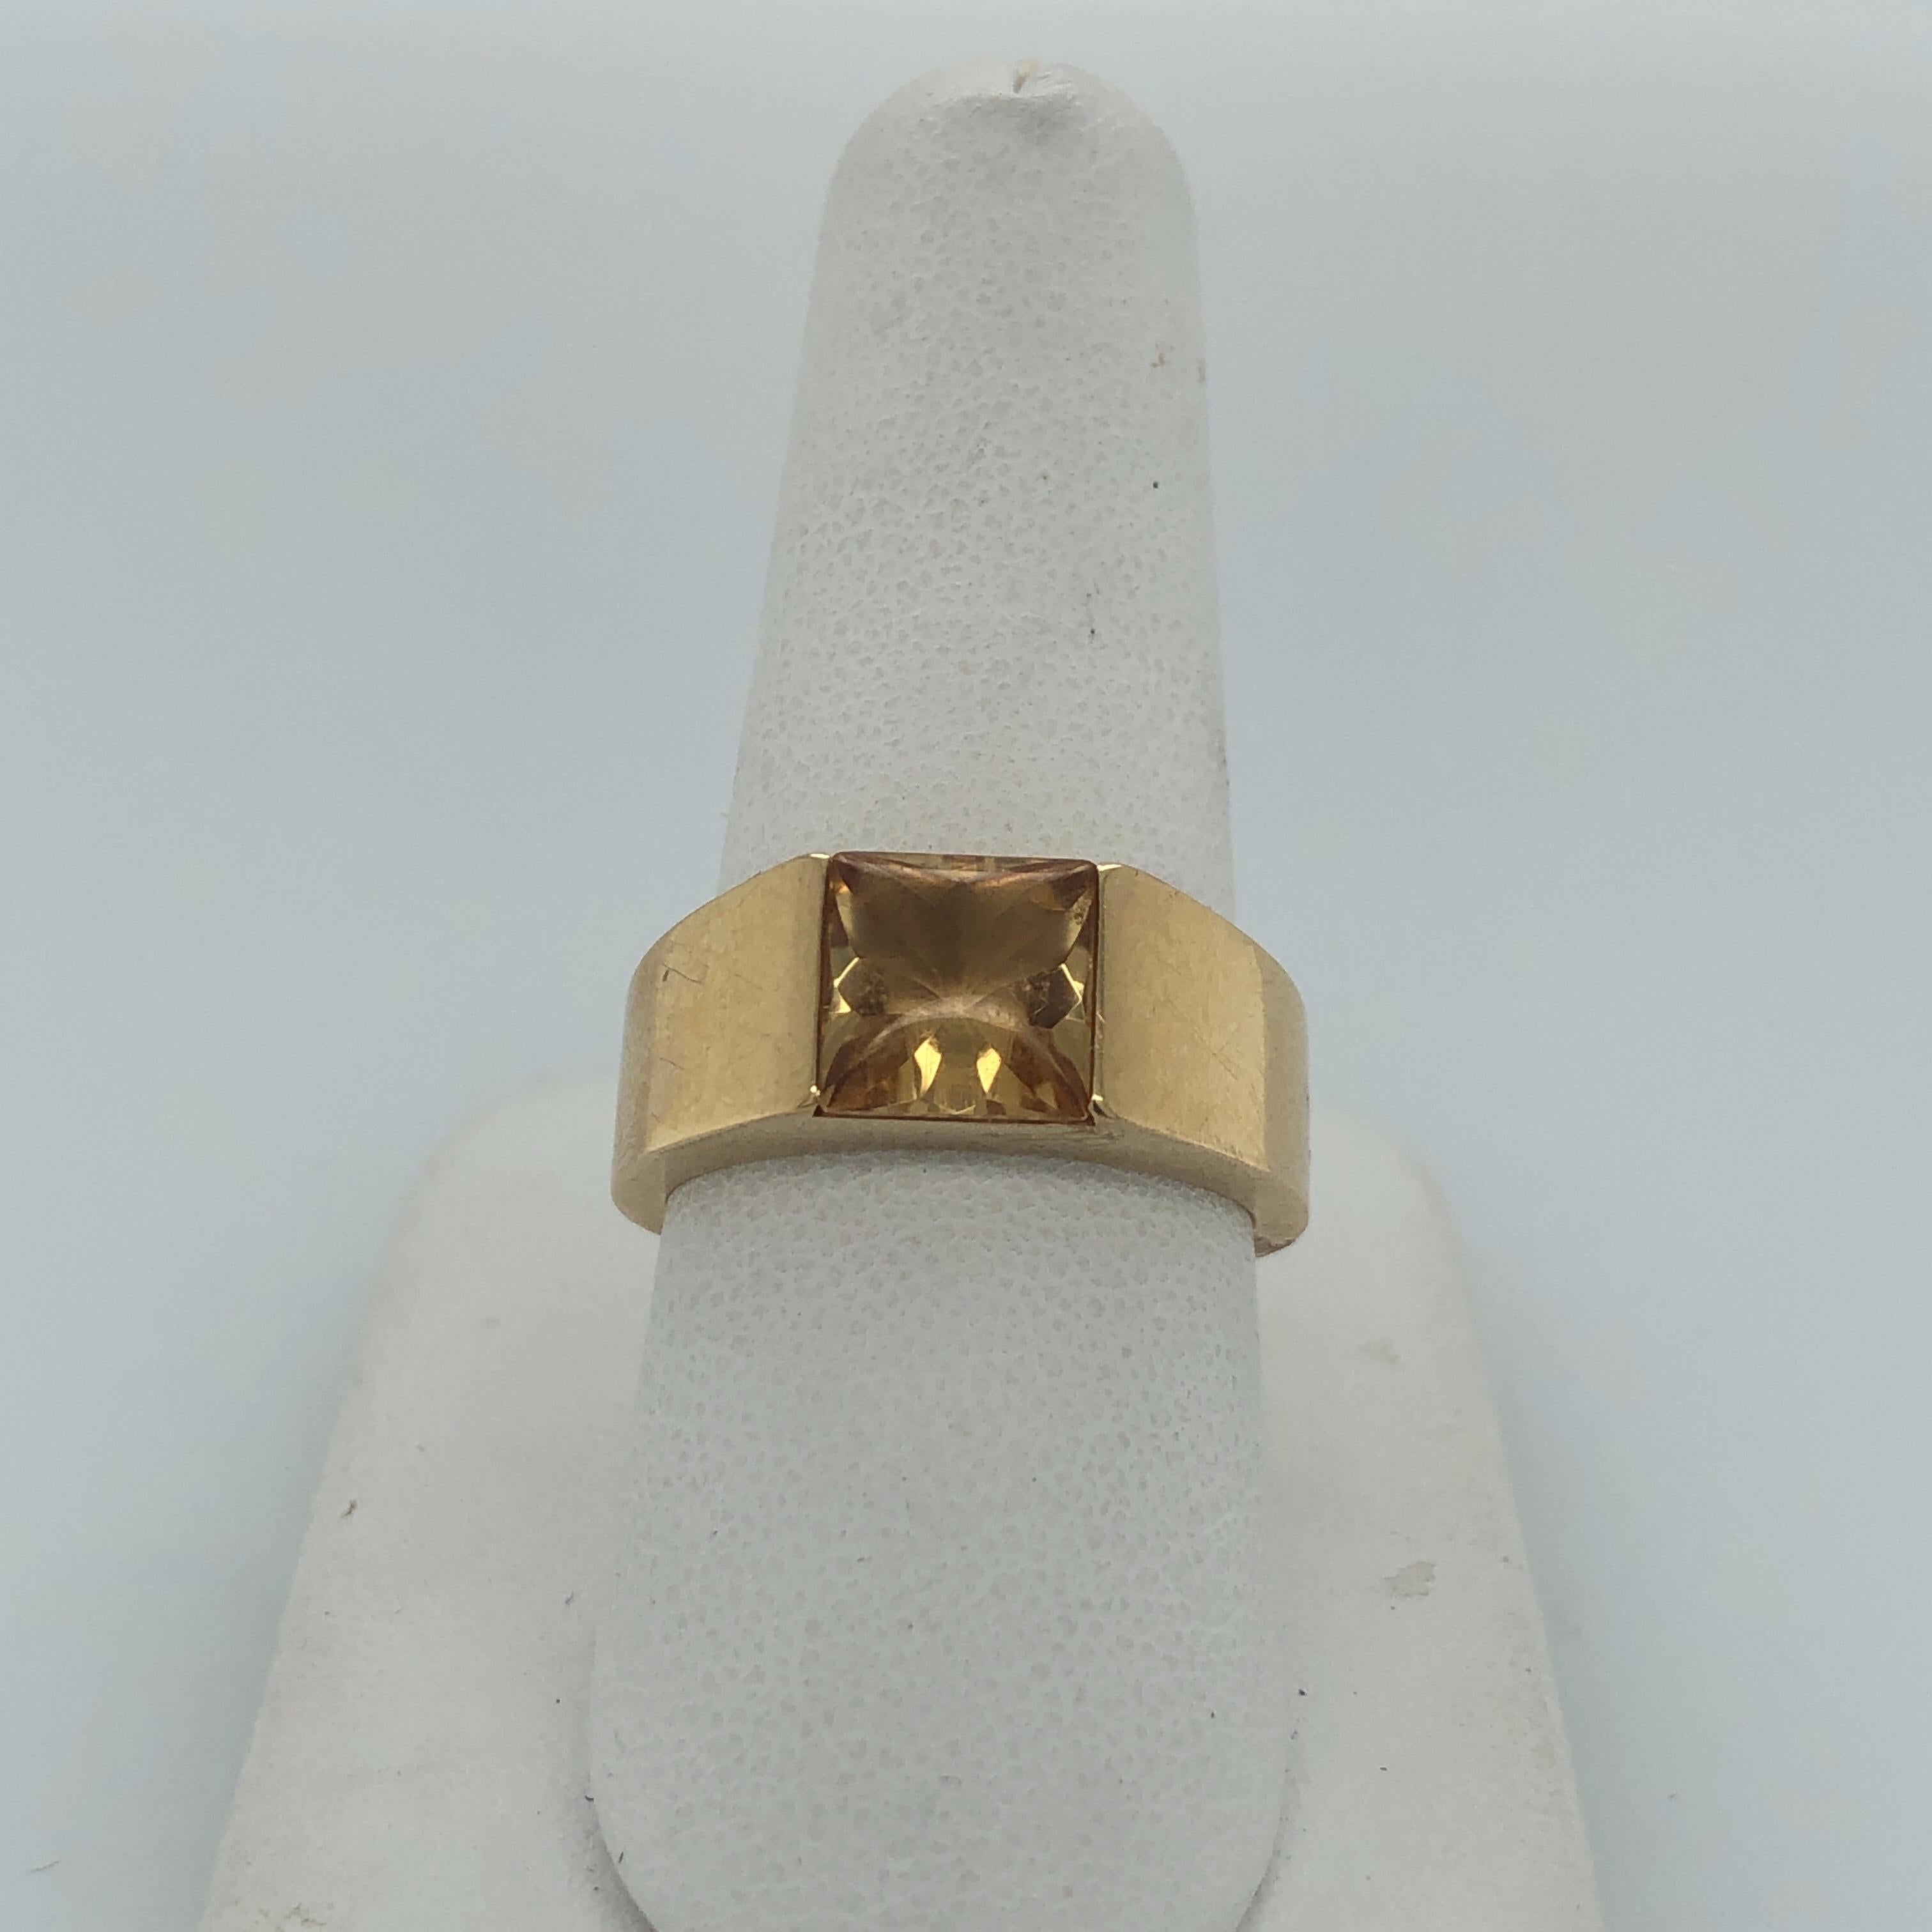 Gents 18K Yellow Gold CARTIER Citrine Ring; center 8mm square cabochon cut natural center stone is half bezel set in a simple classic design.  Inside ring features manufacturer's marks: 58 CARTIER 1997 750 Cartier AC 0263 and trademark stamp